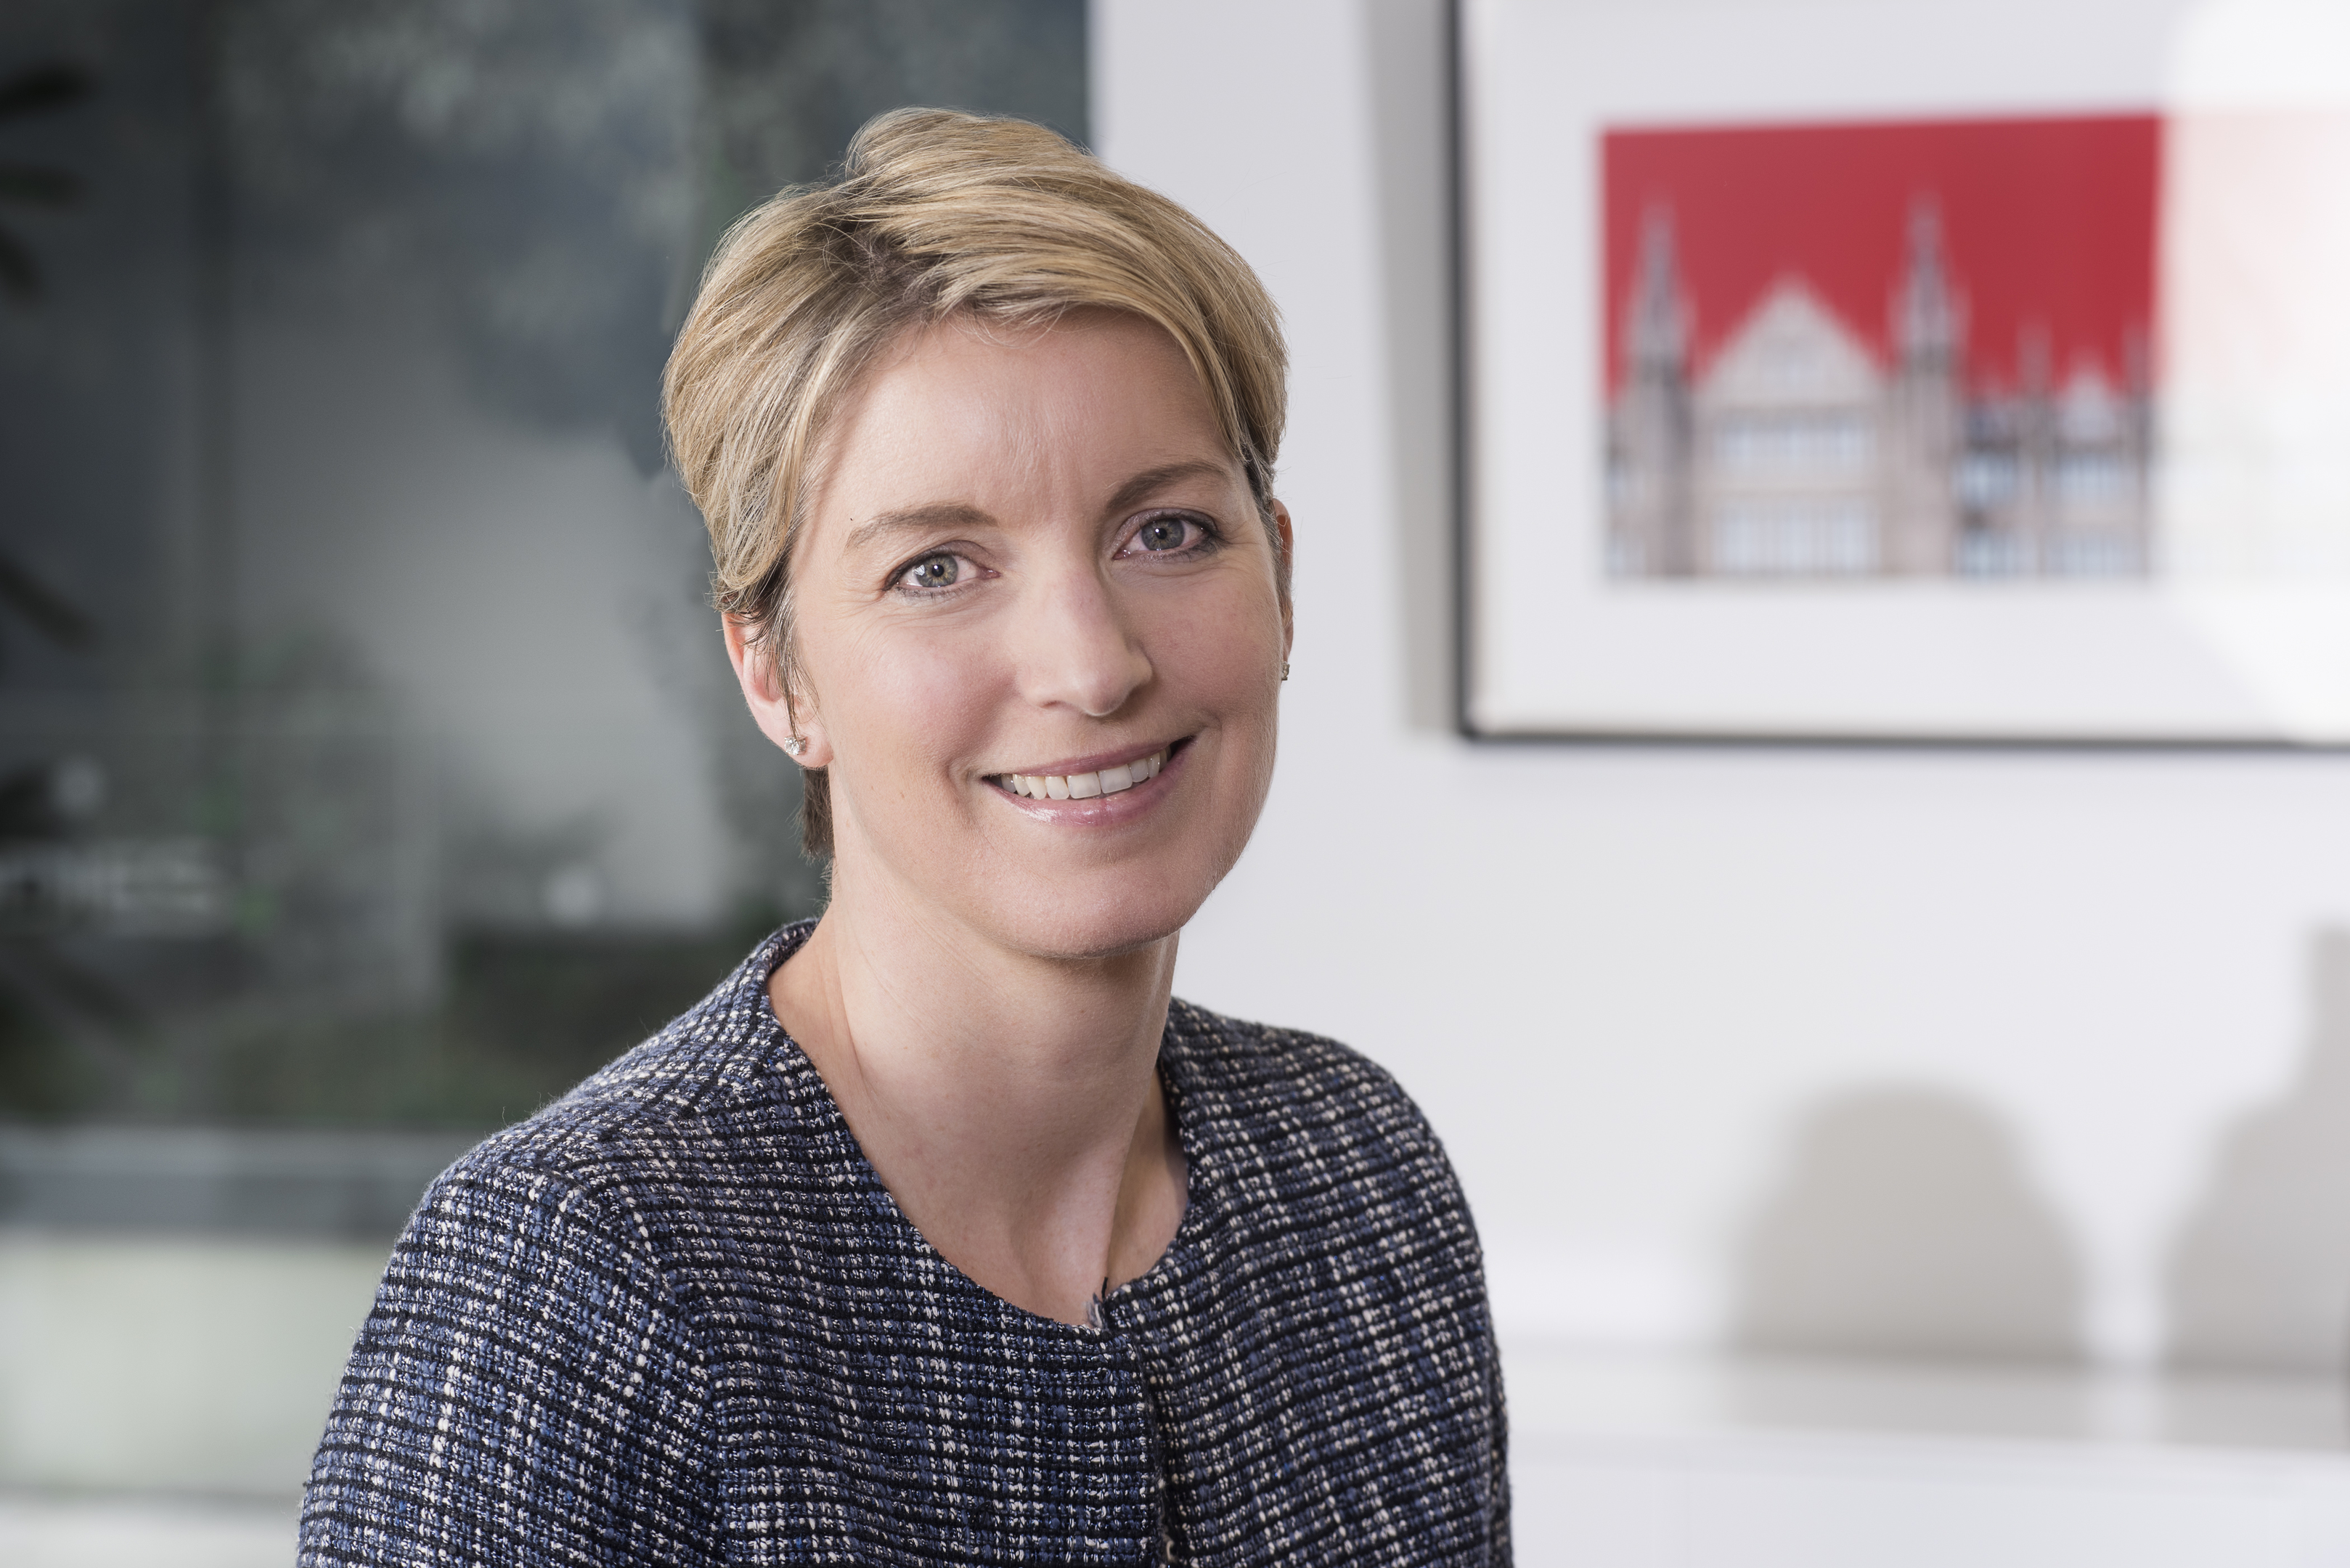 Clare Munro, Head of Energy and Infrastructure at Brodies LLP